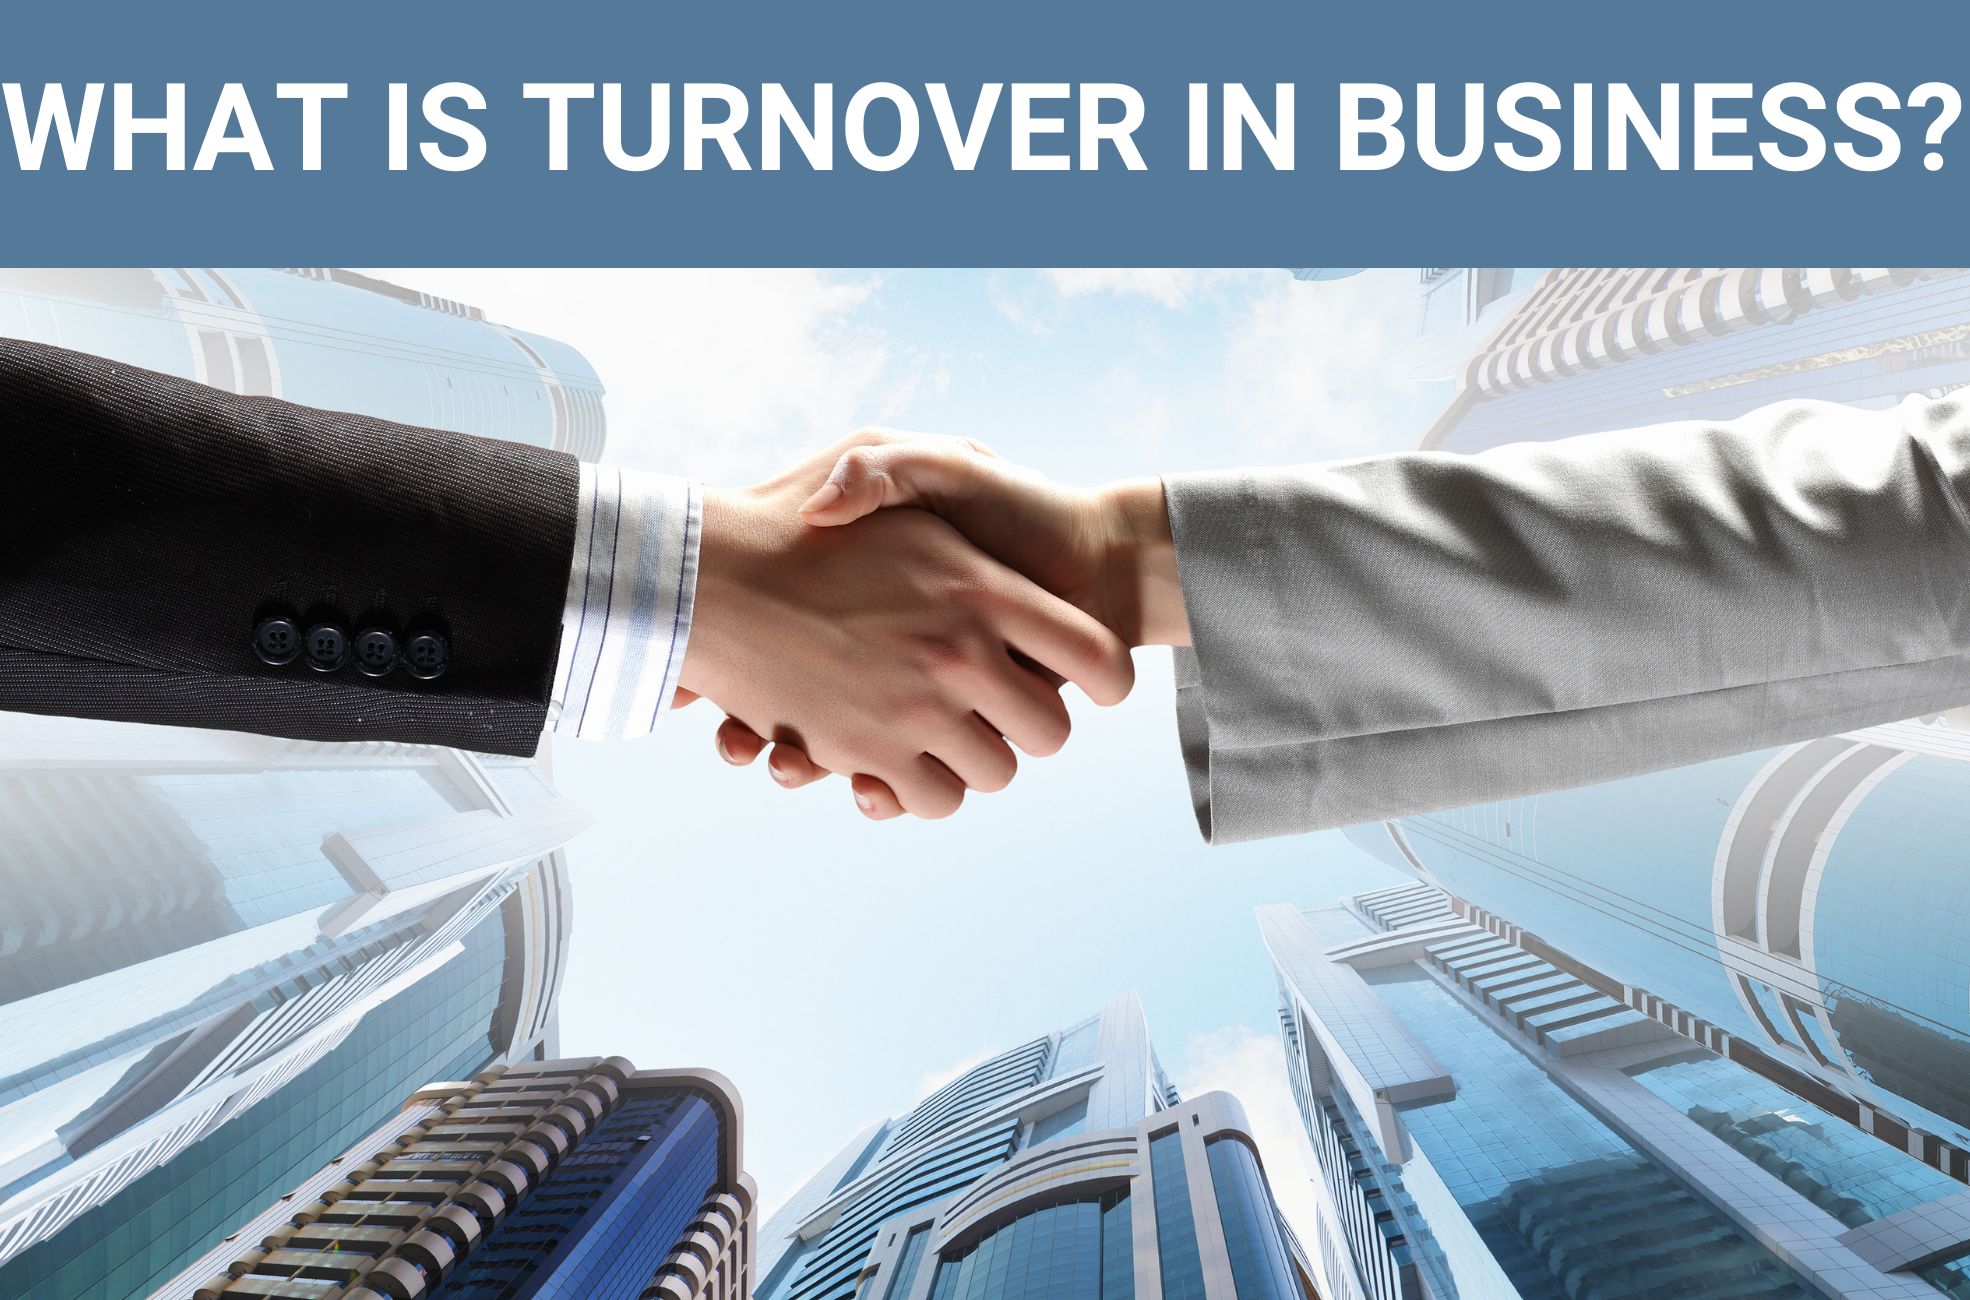 Cover Photo Saying "What Is Turnover In Business?"